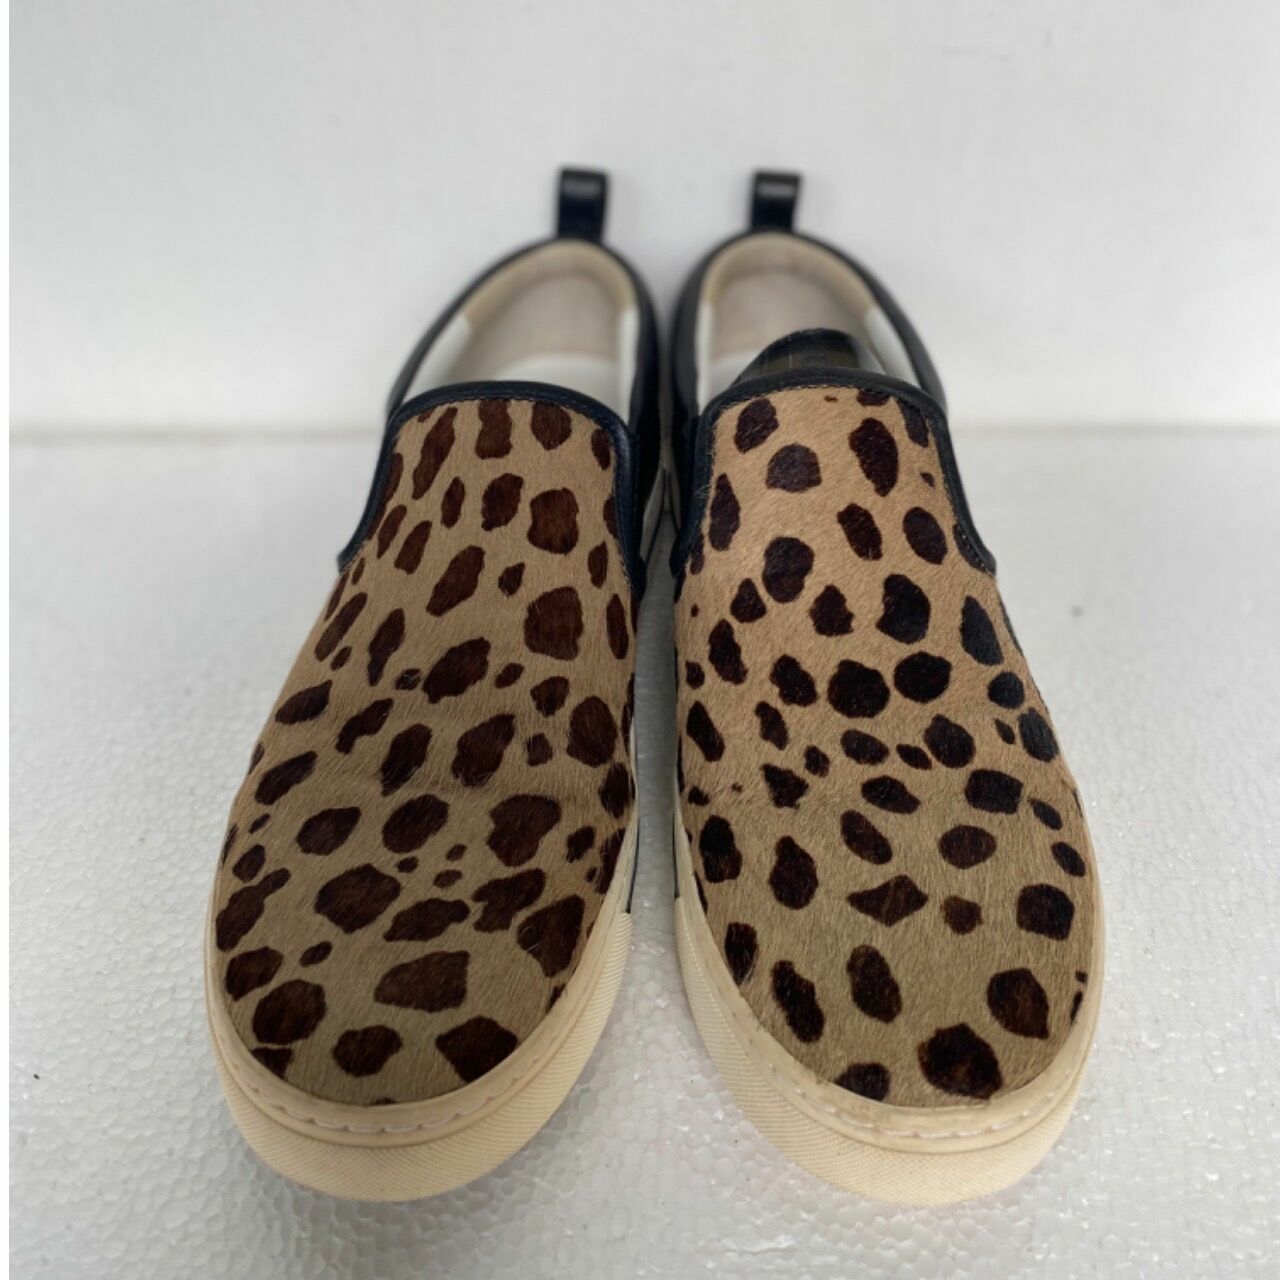 Marc By Marc Jacobs Brown Leopard Print Slip On